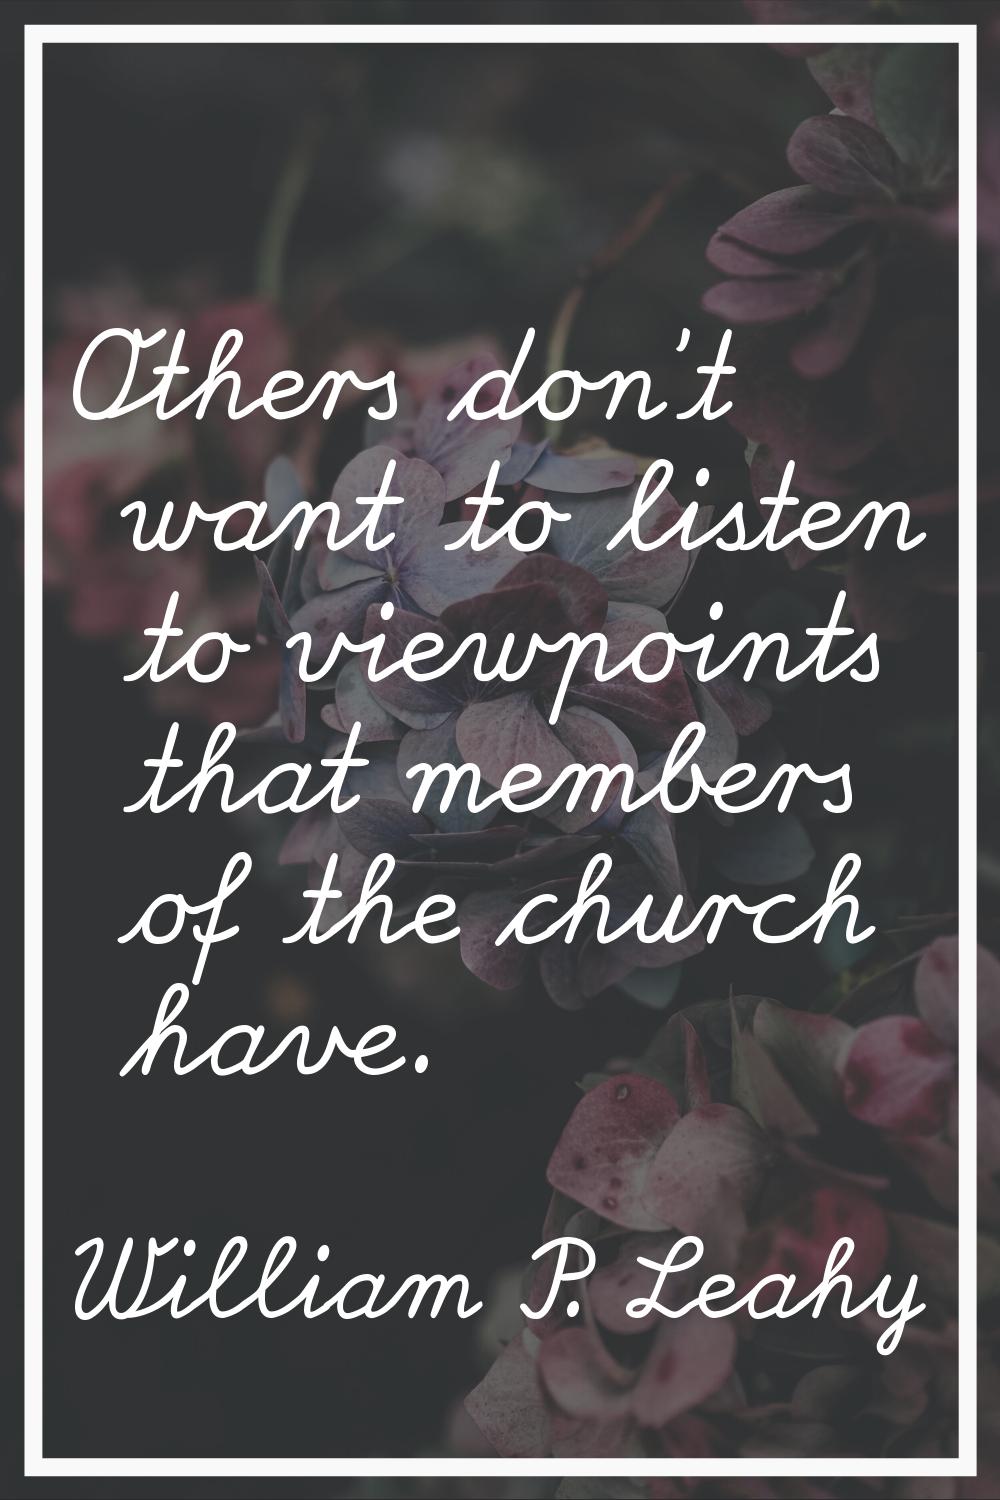 Others don't want to listen to viewpoints that members of the church have.